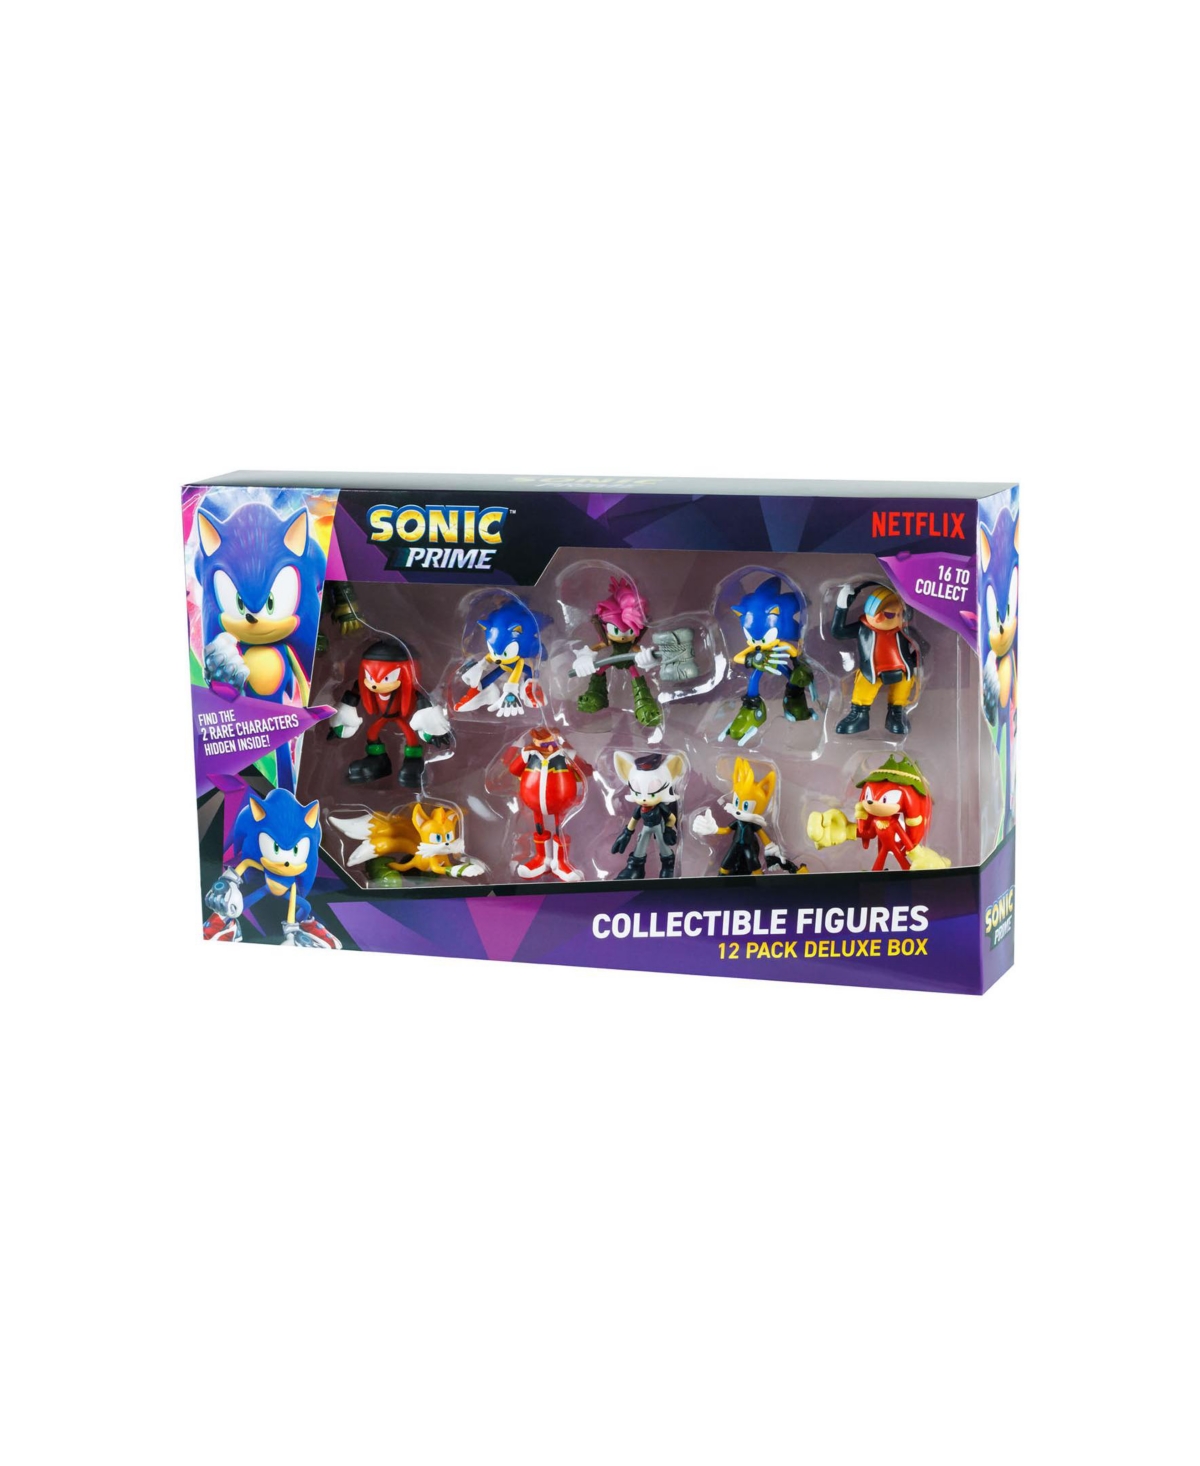 Sonic 2.5" Figures And 12 Pack Deluxe Box In No Color